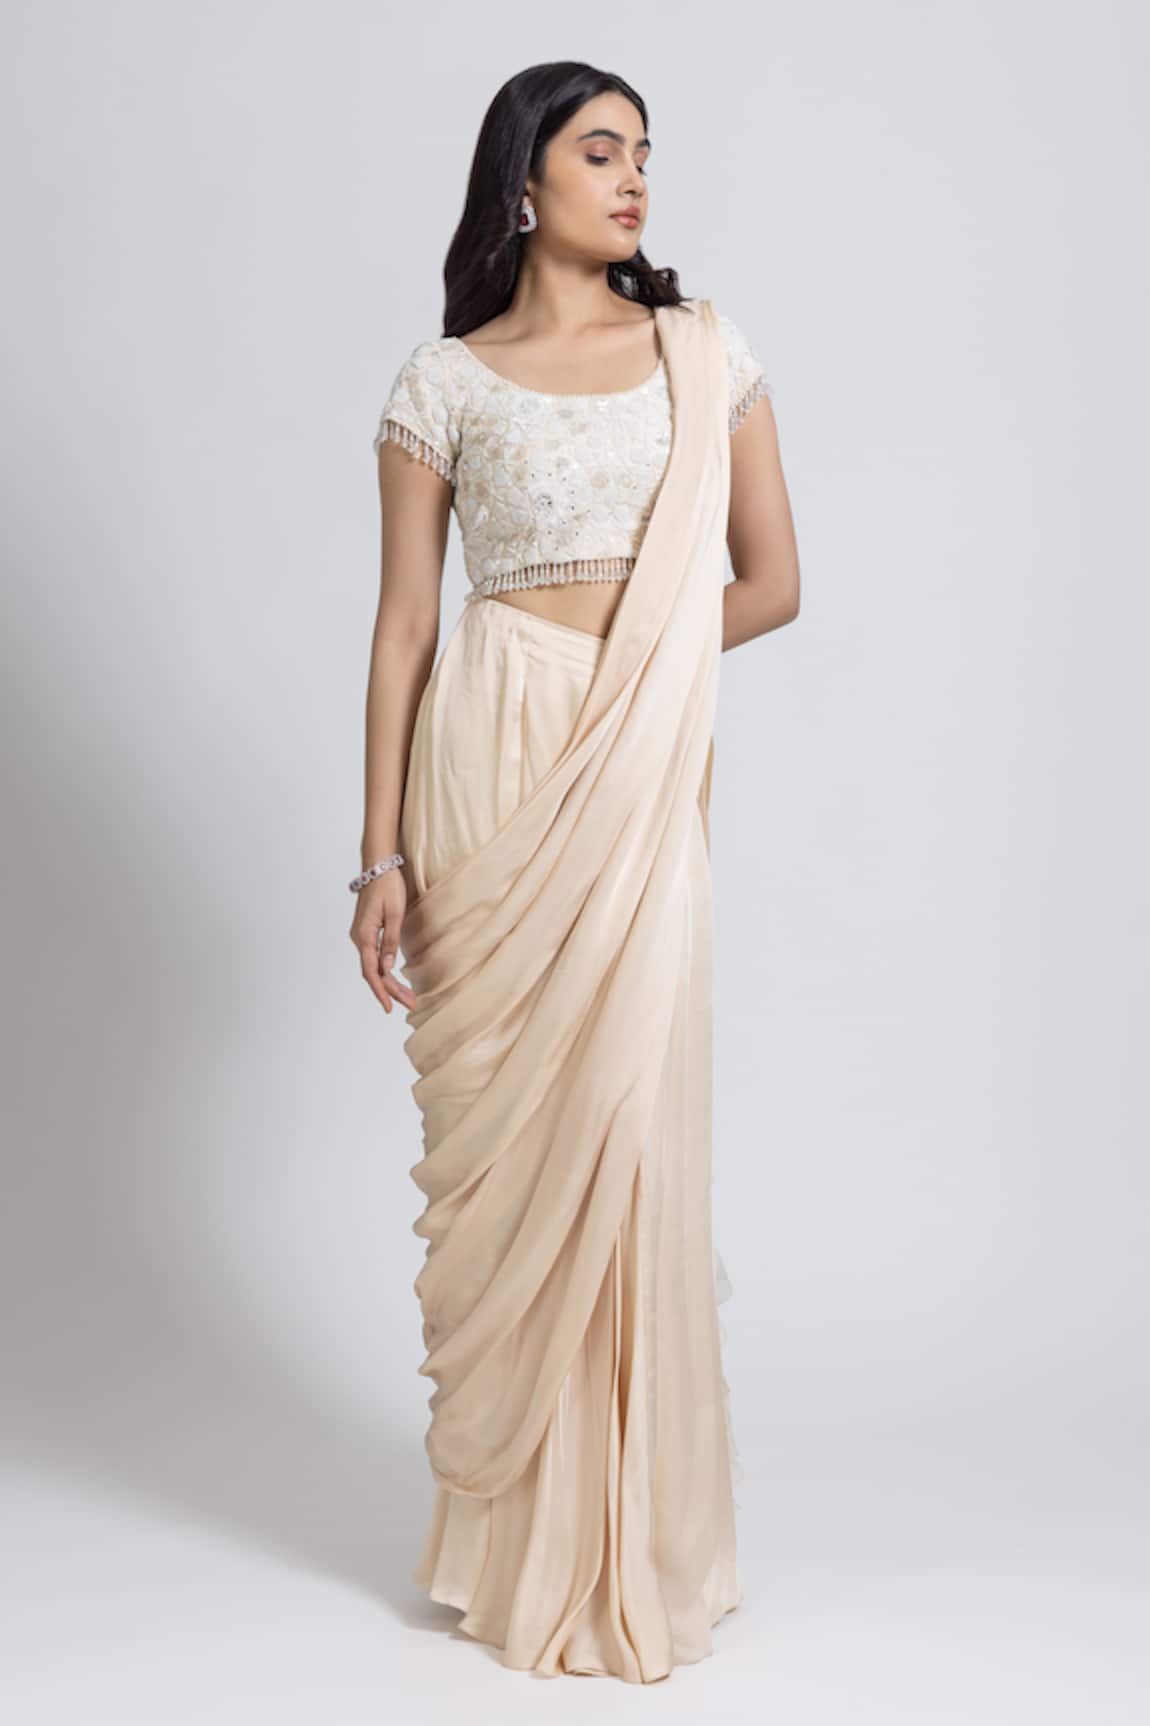 NIMA FASHIONS Pre-Draped Saree With Hand Embroidered Blouse